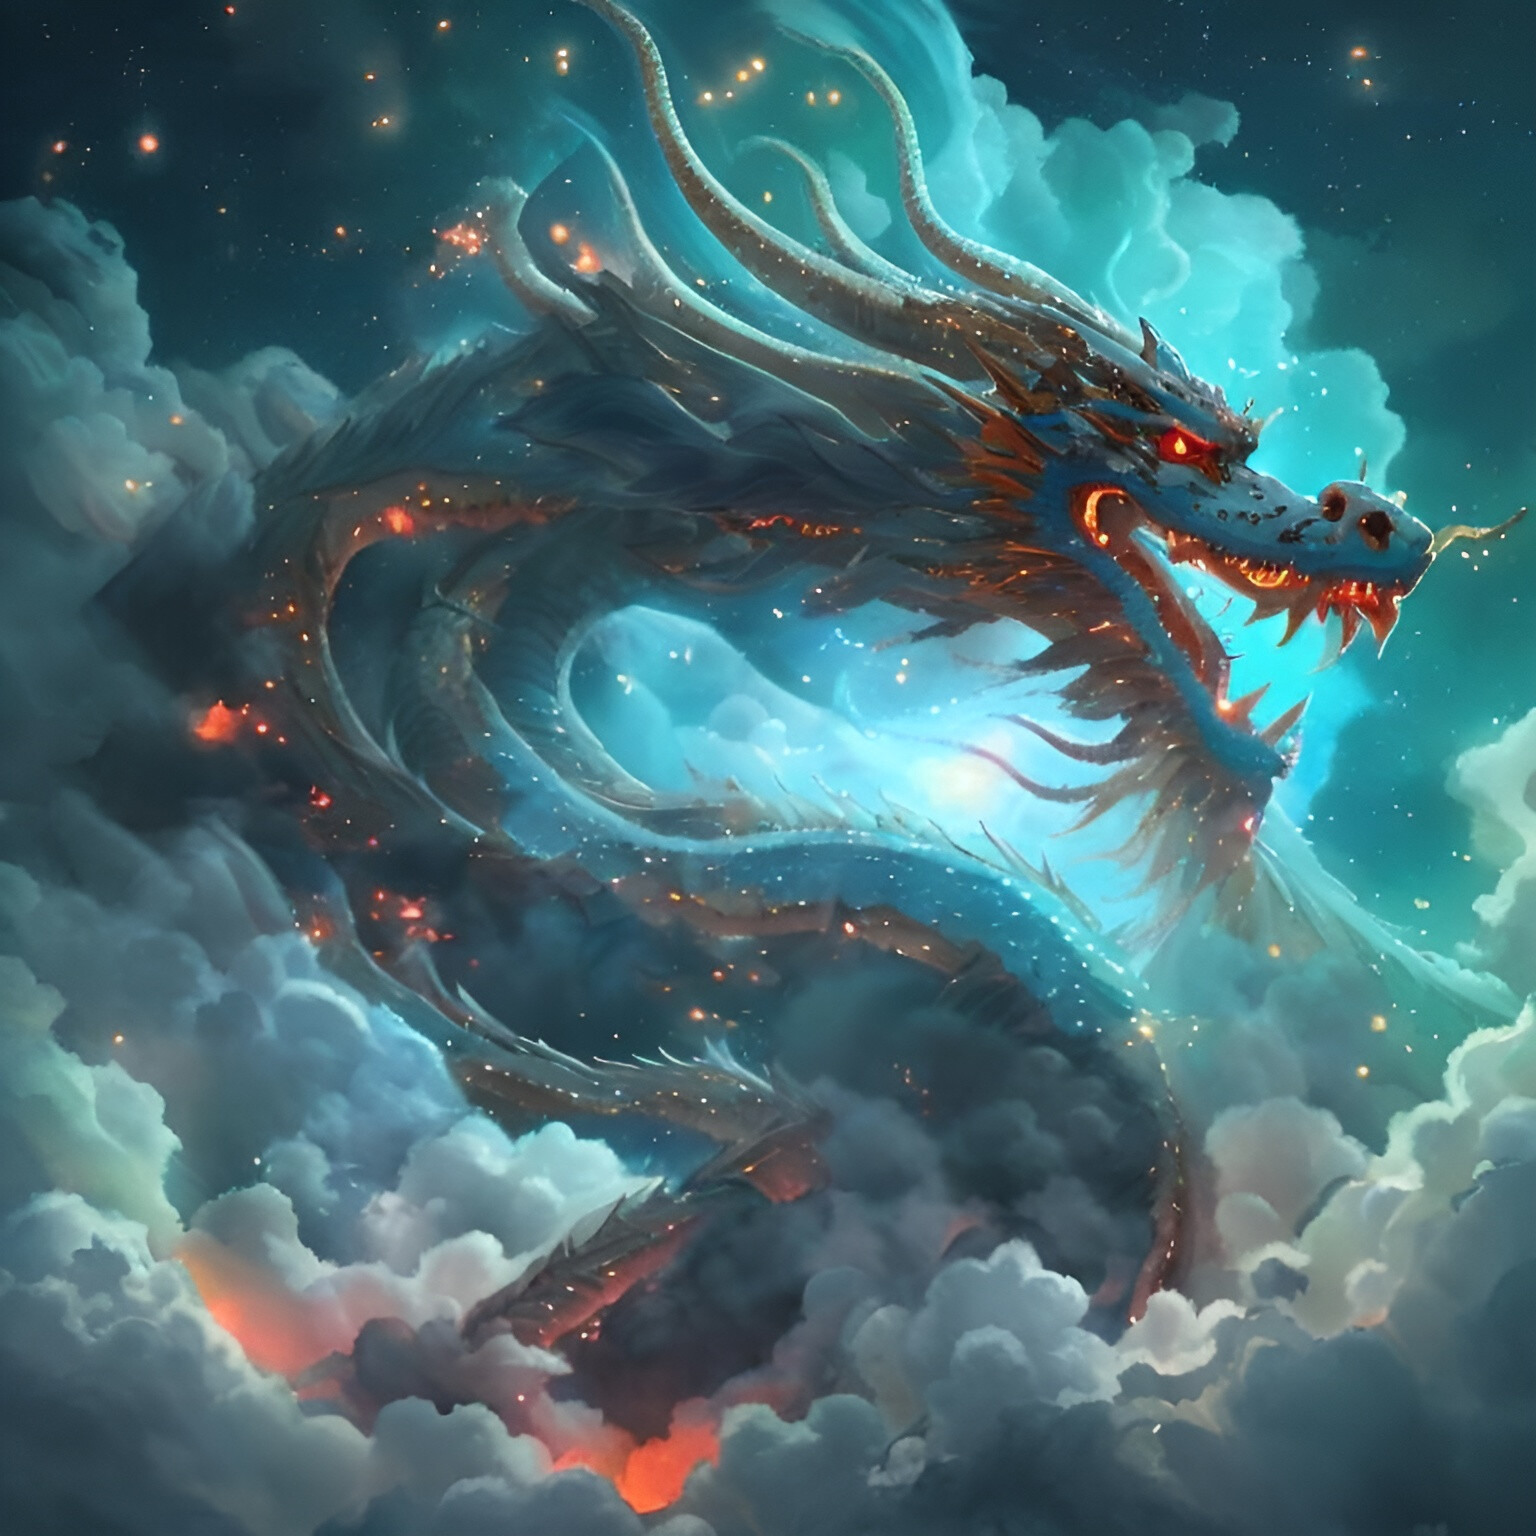 ArtStation - Chinese dragons in the sky above clouds